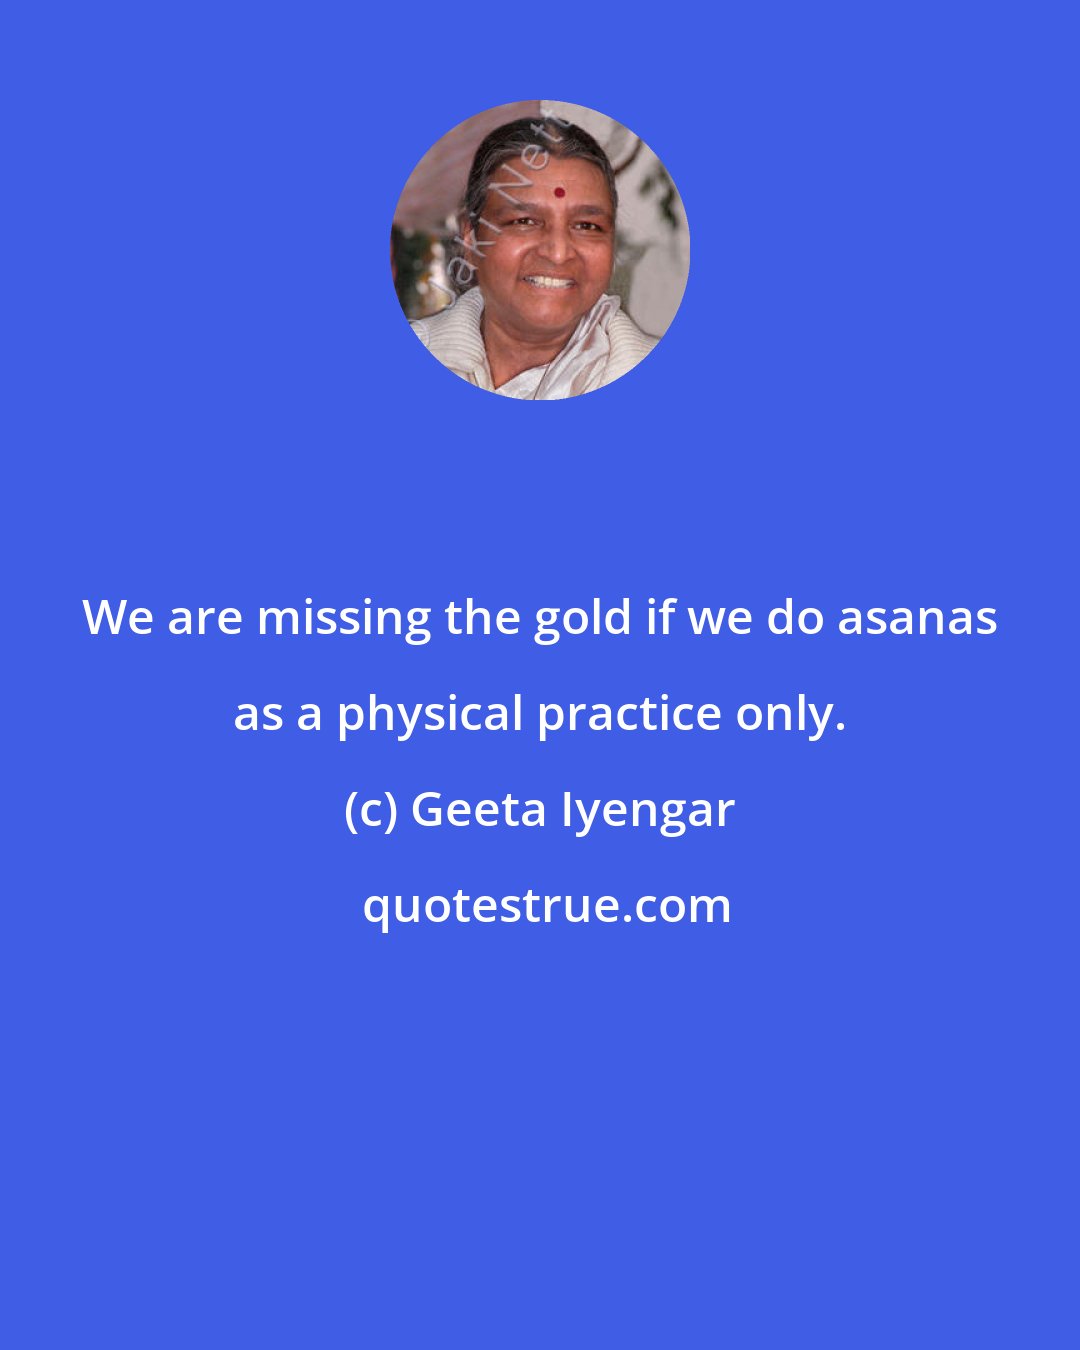 Geeta Iyengar: We are missing the gold if we do asanas as a physical practice only.